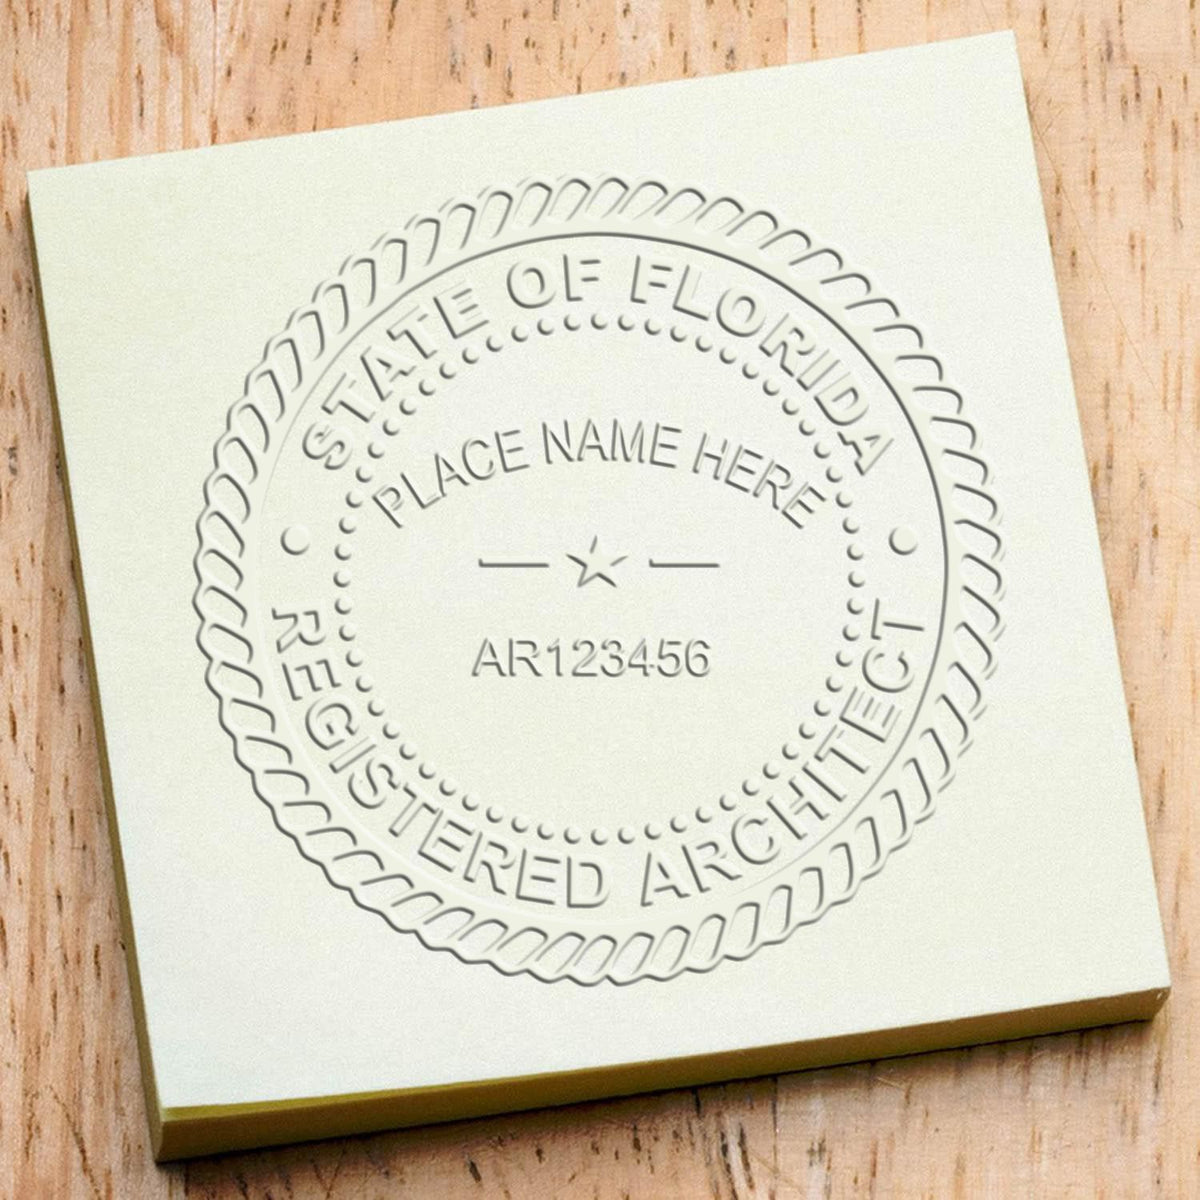 The State of Florida Architectural Seal Embosser stamp impression comes to life with a crisp, detailed photo on paper - showcasing true professional quality.